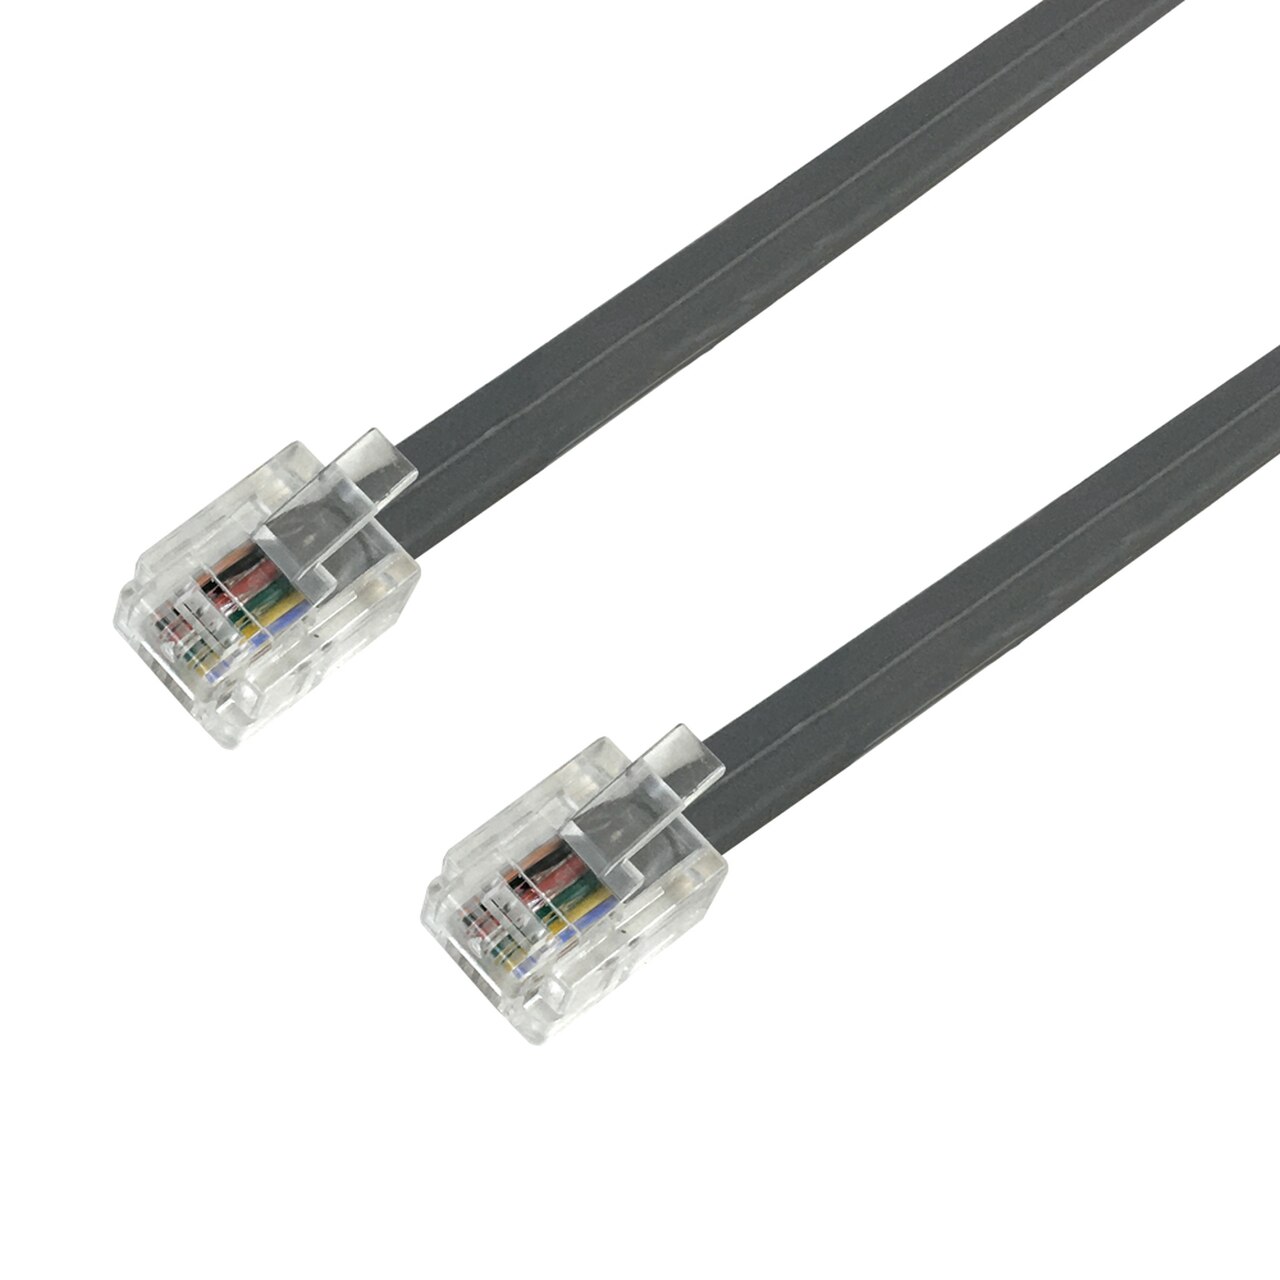 HF-CSS6P6C: 1 to 15 ft RJ12 Modular Data Telephone Cable Straight Through 6P6C - 28AWG - Stain Silver